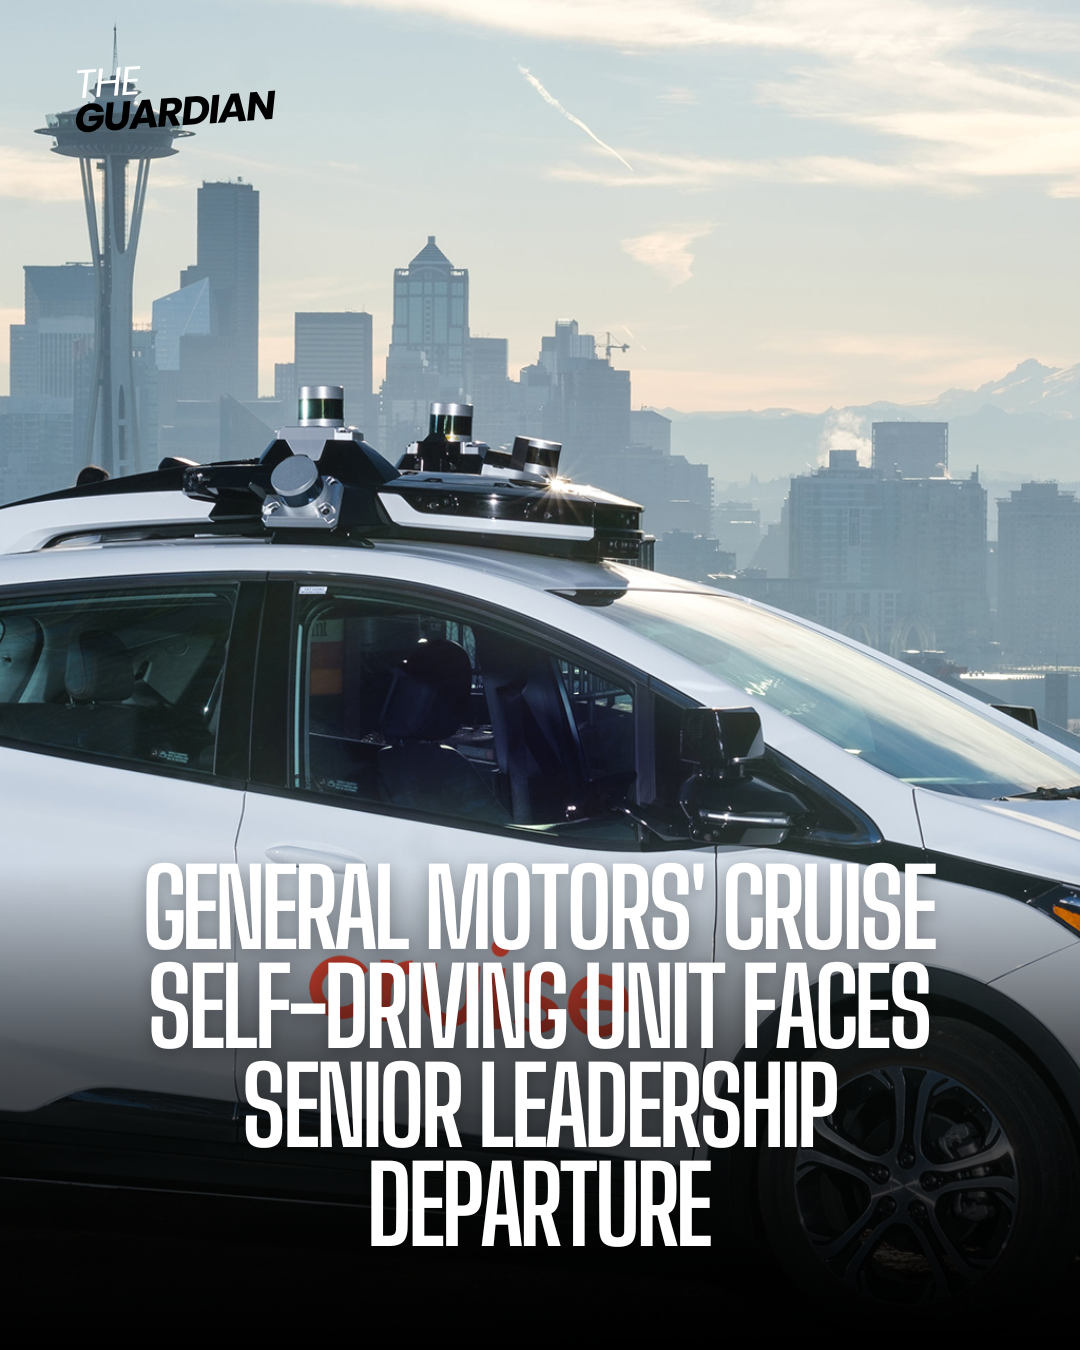 Carl Jenkins, the chief of hardware at General Motors' Cruise self-driving programme, has announced his resignation after six years.